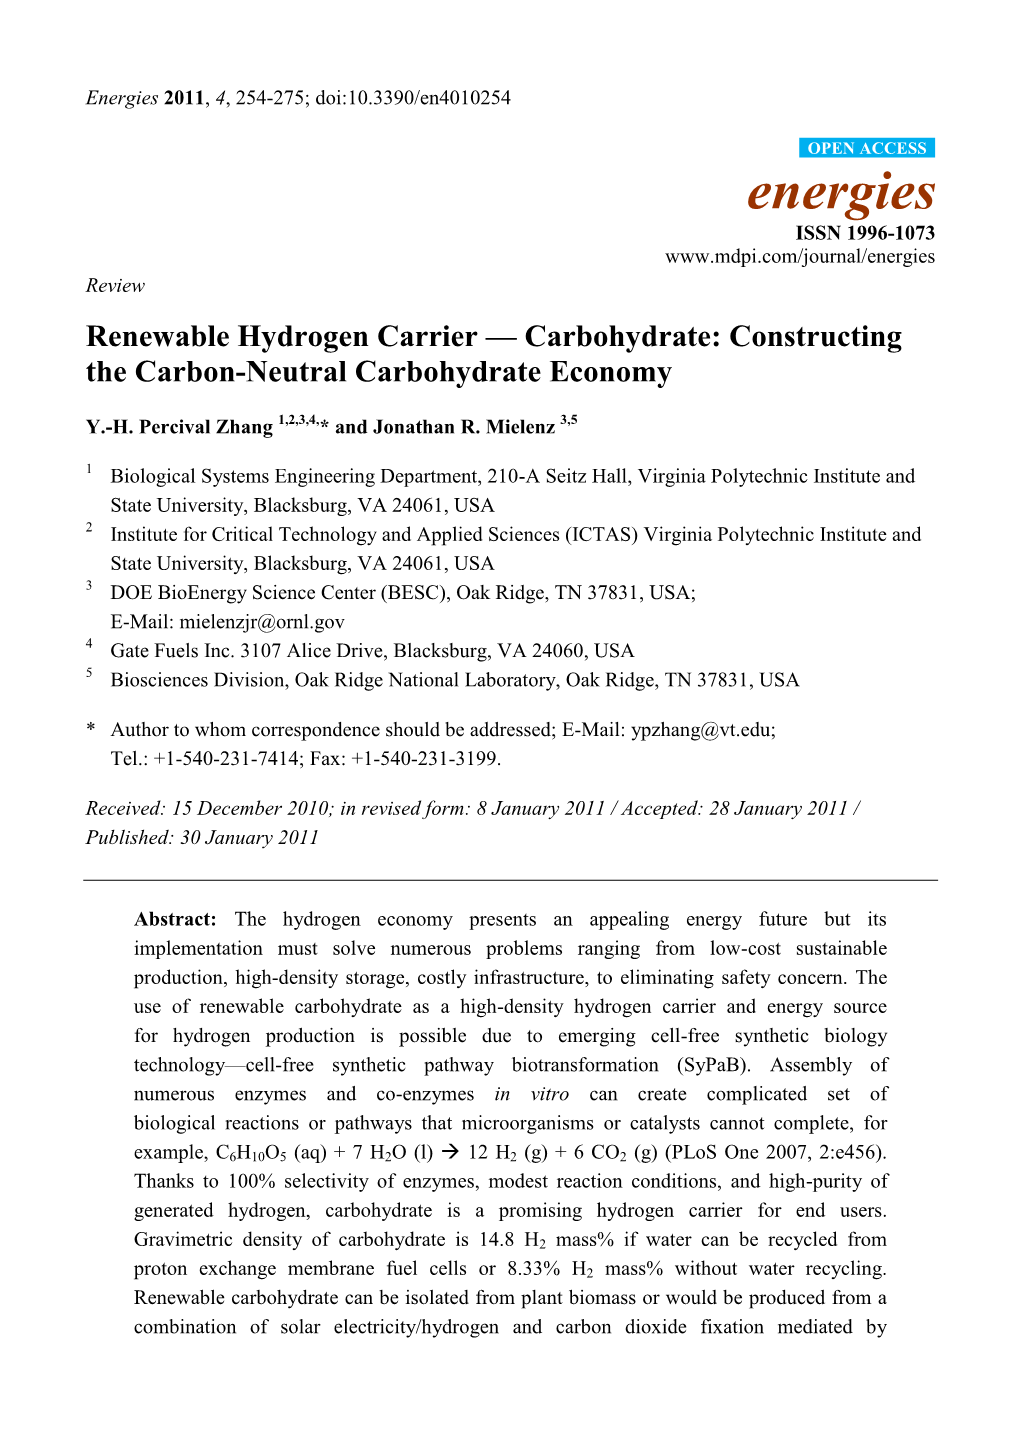 Carbohydrate: Constructing the Carbon-Neutral Carbohydrate Economy